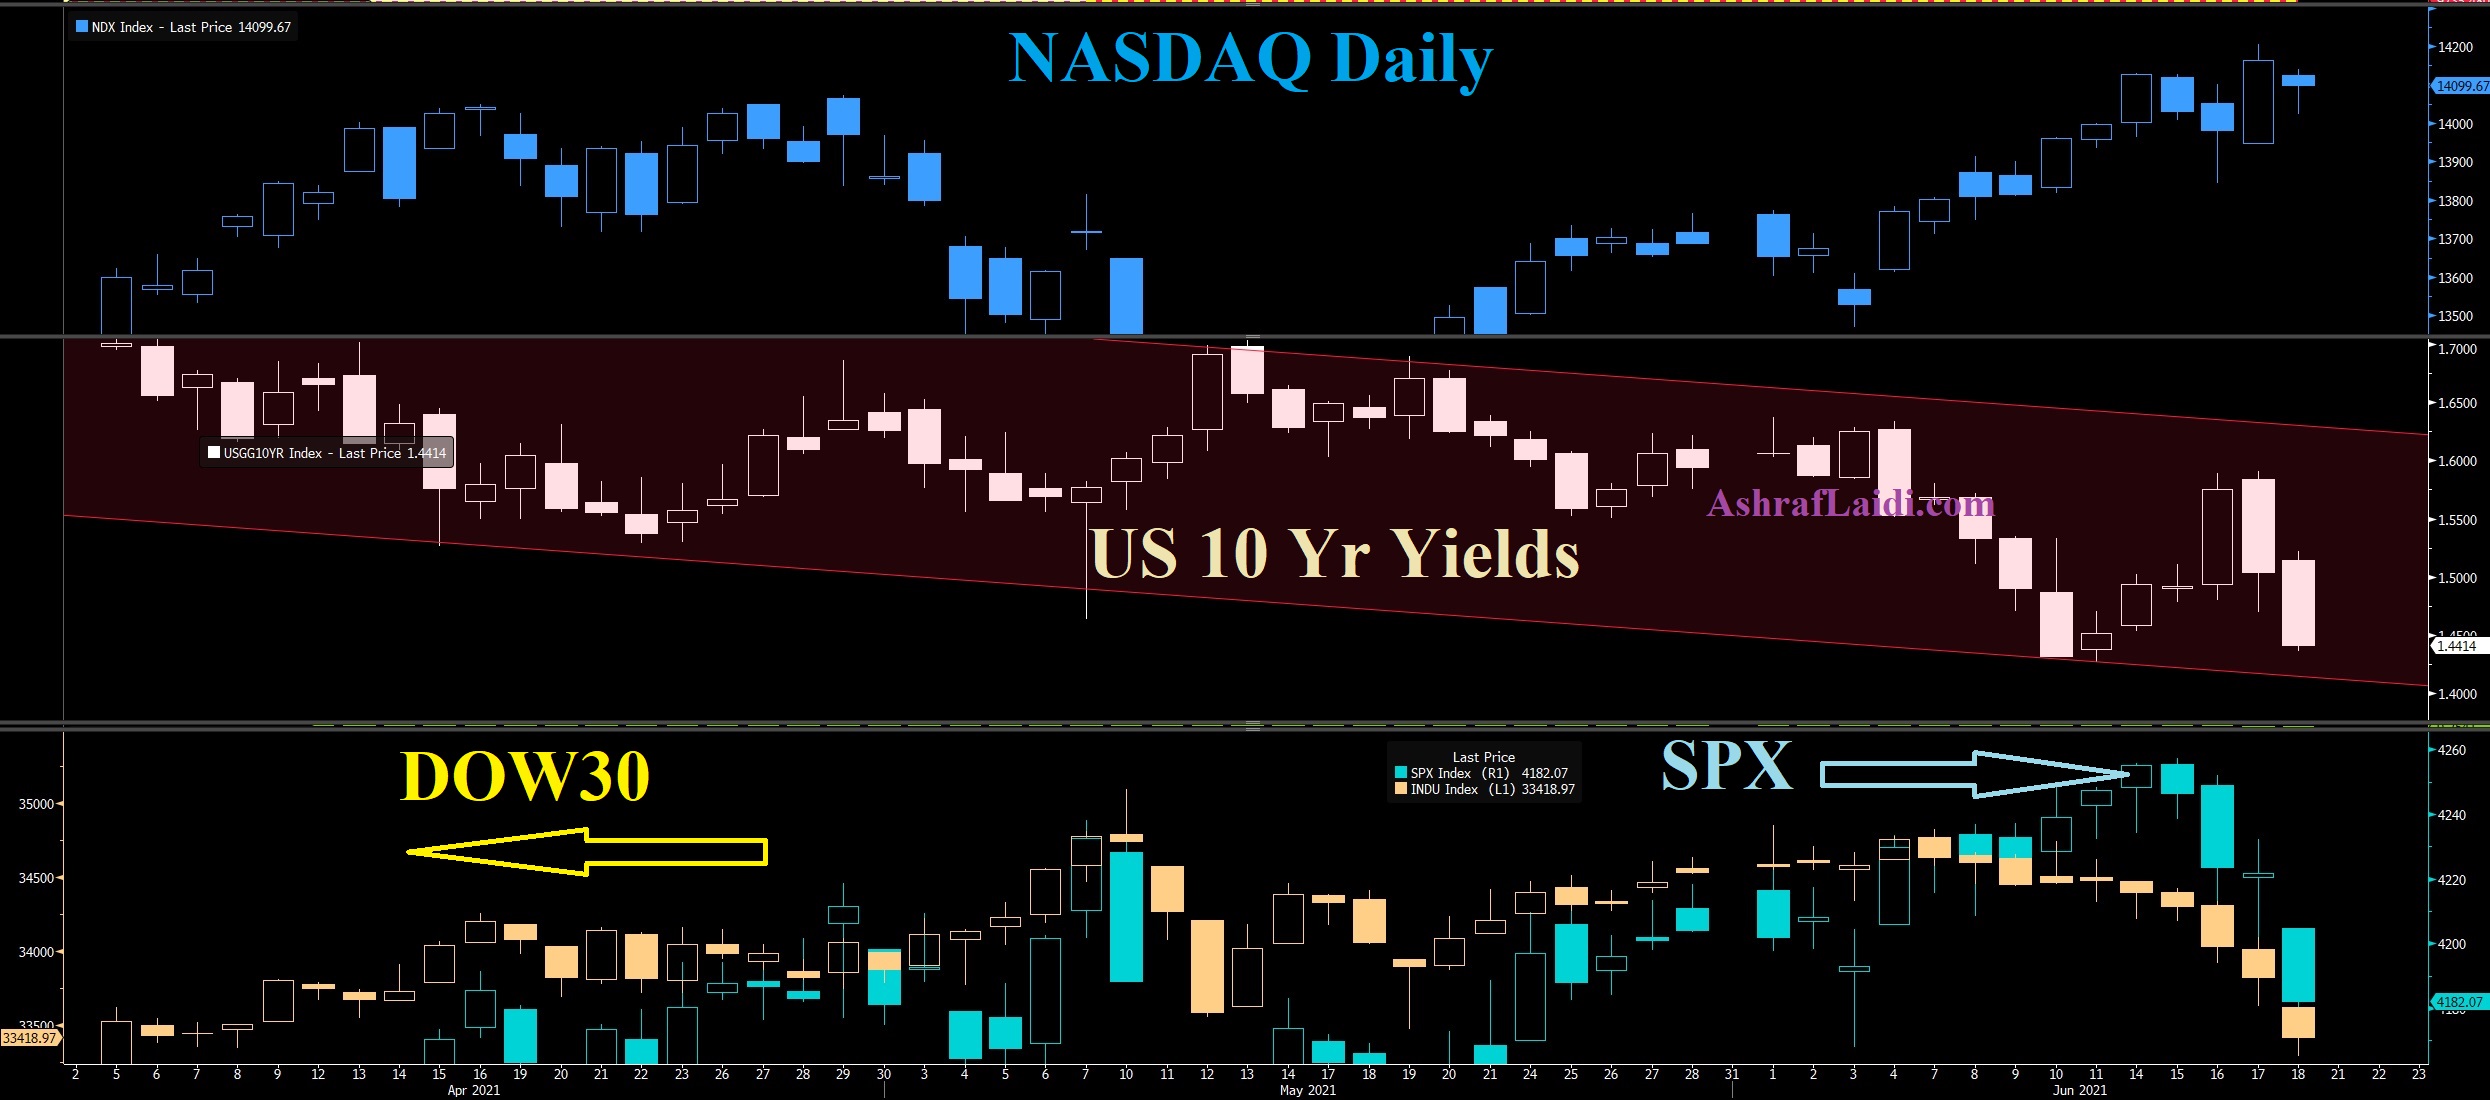 NASDAQ, DOW 30 and SPX Daily Charts